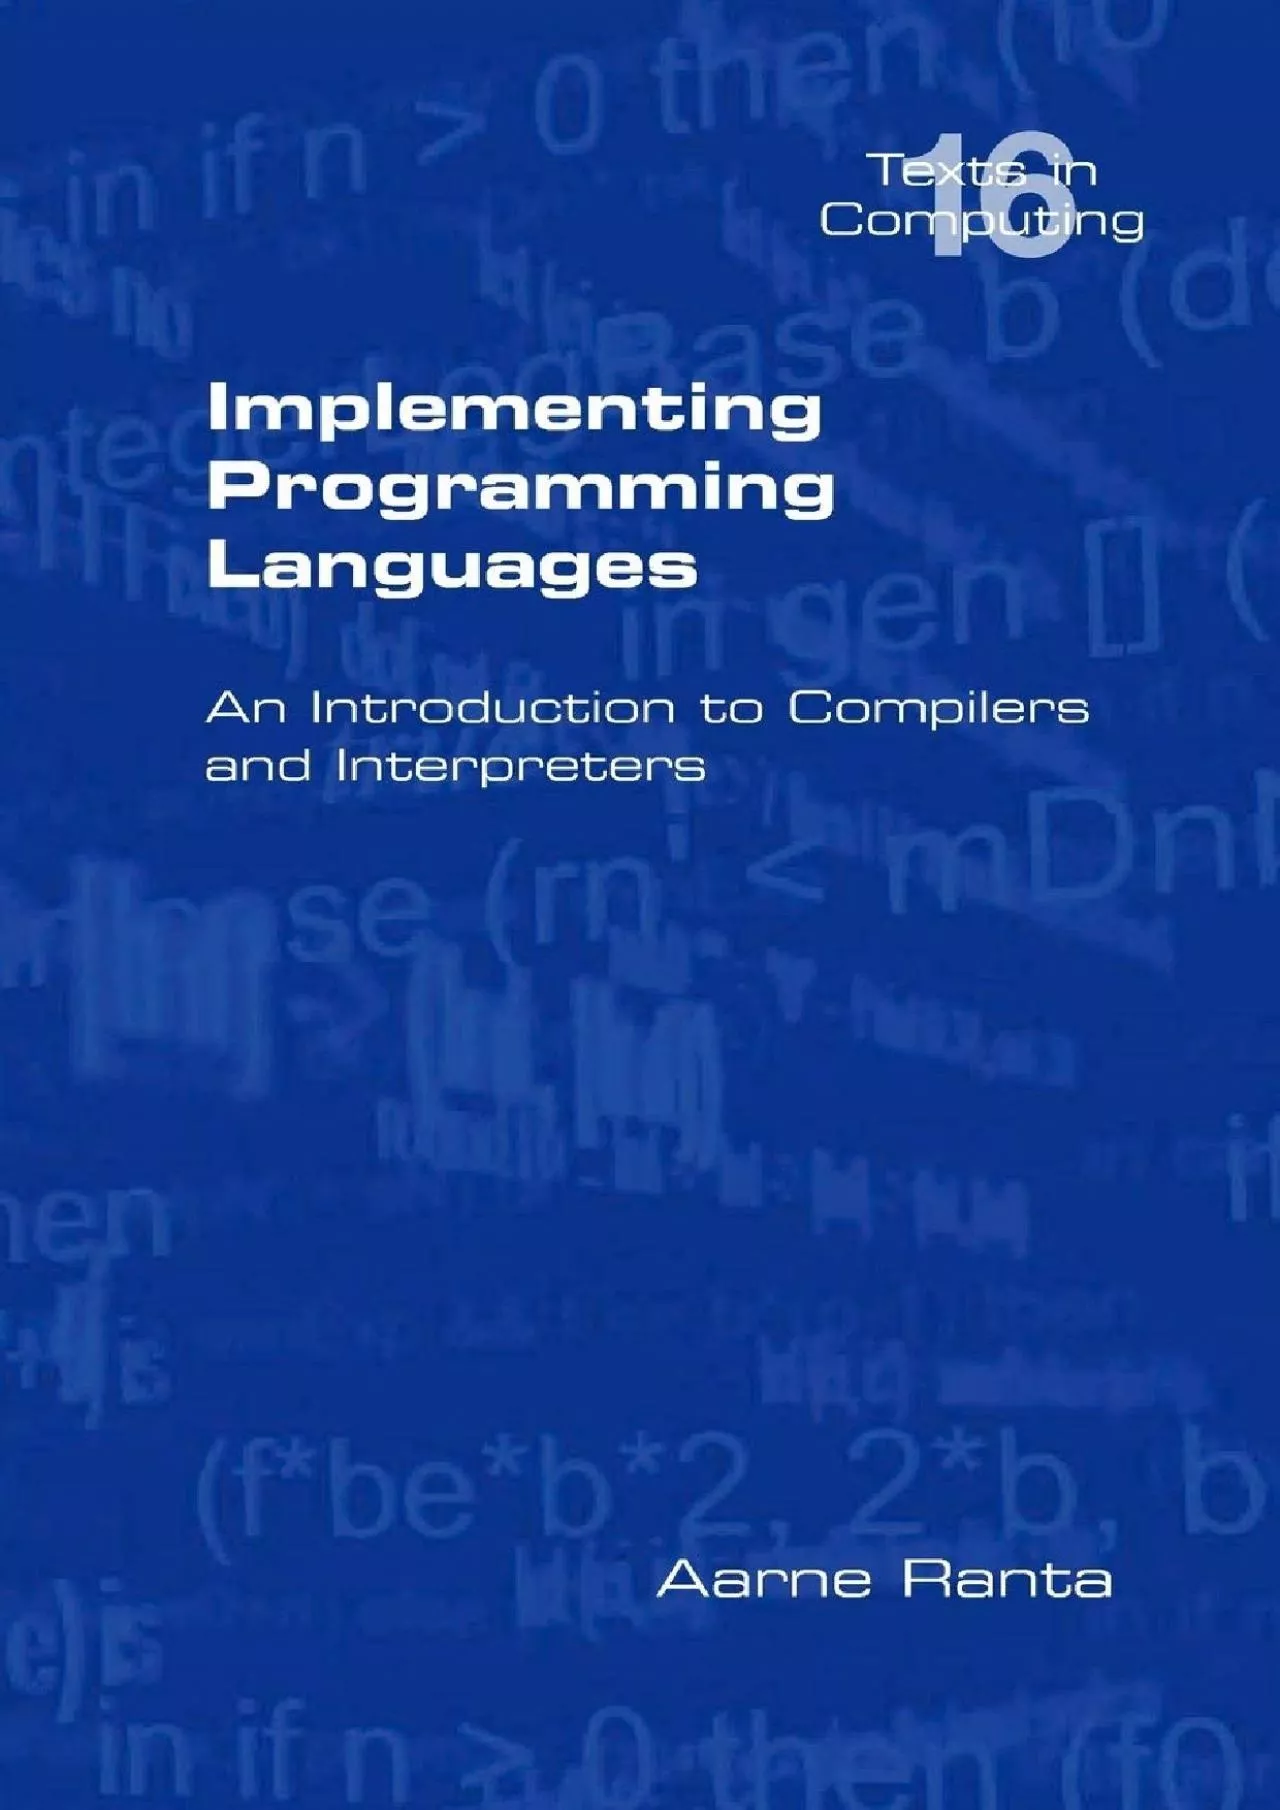 [FREE]-Implementing Programming Languages. an Introduction to Compilers and Interpreters